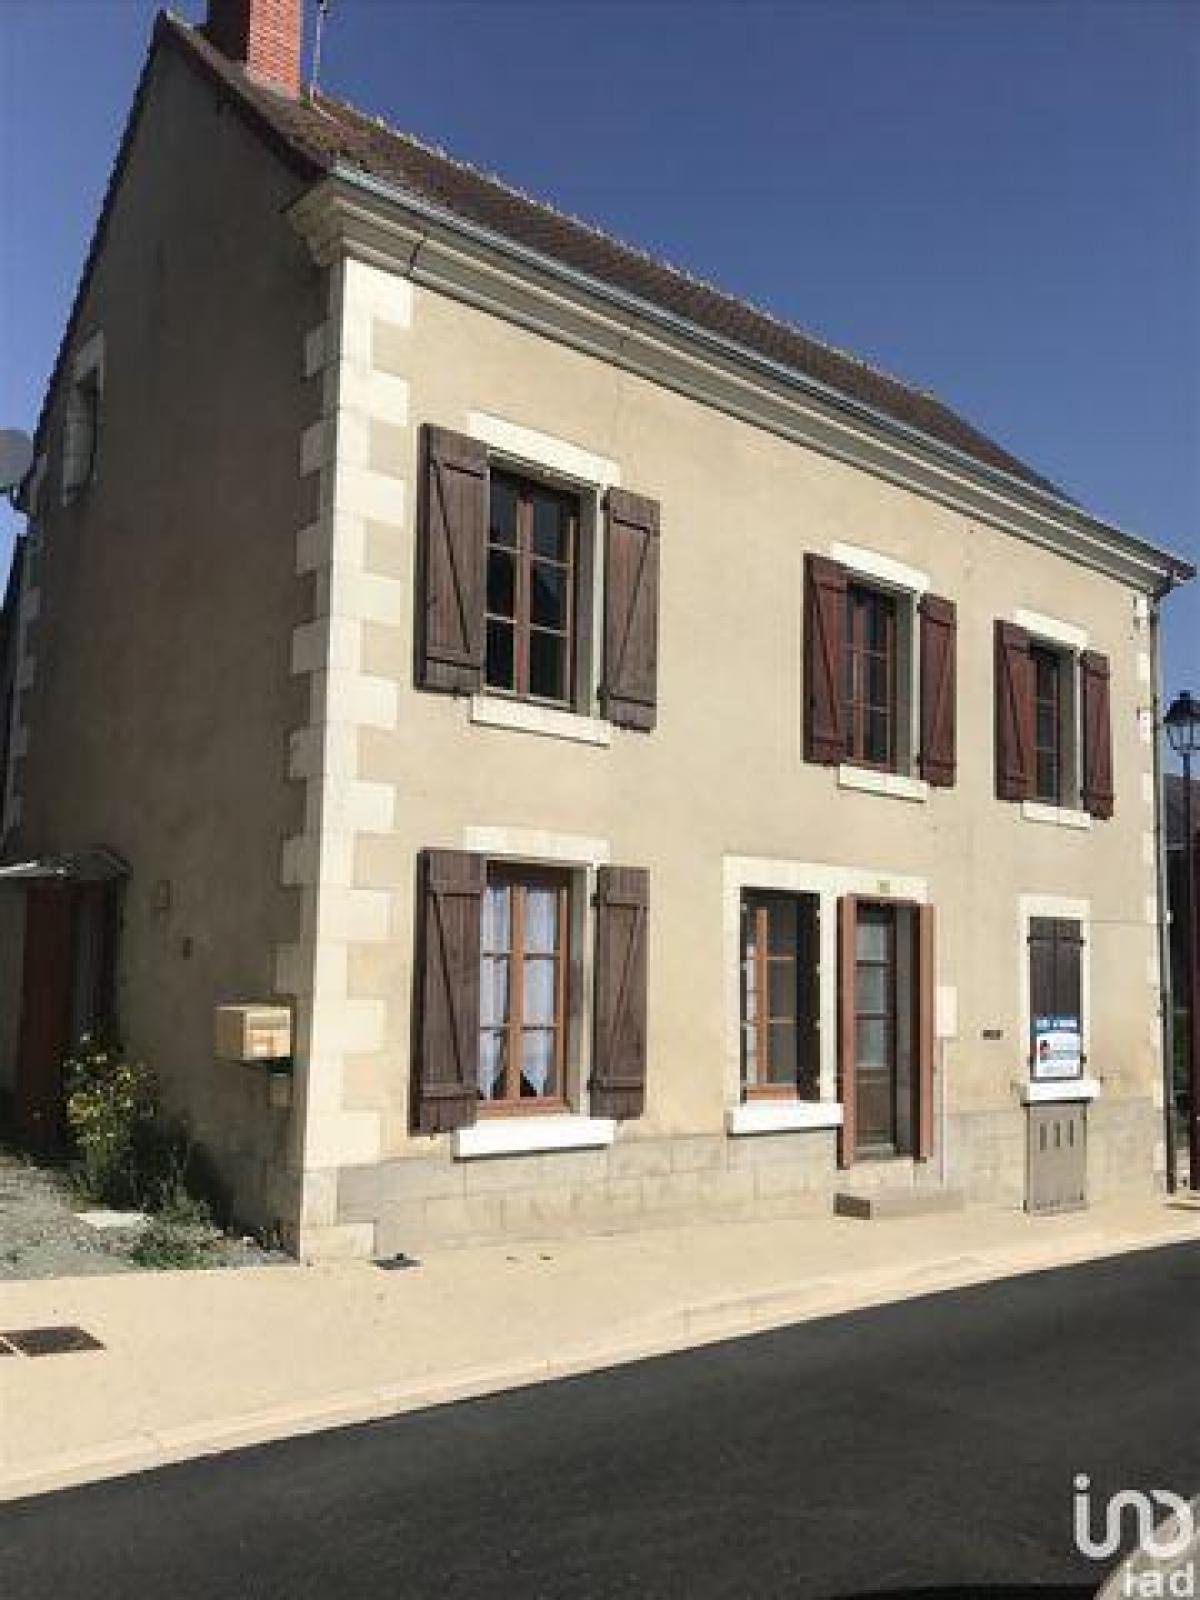 Picture of Home For Sale in Faverolles, Centre, France